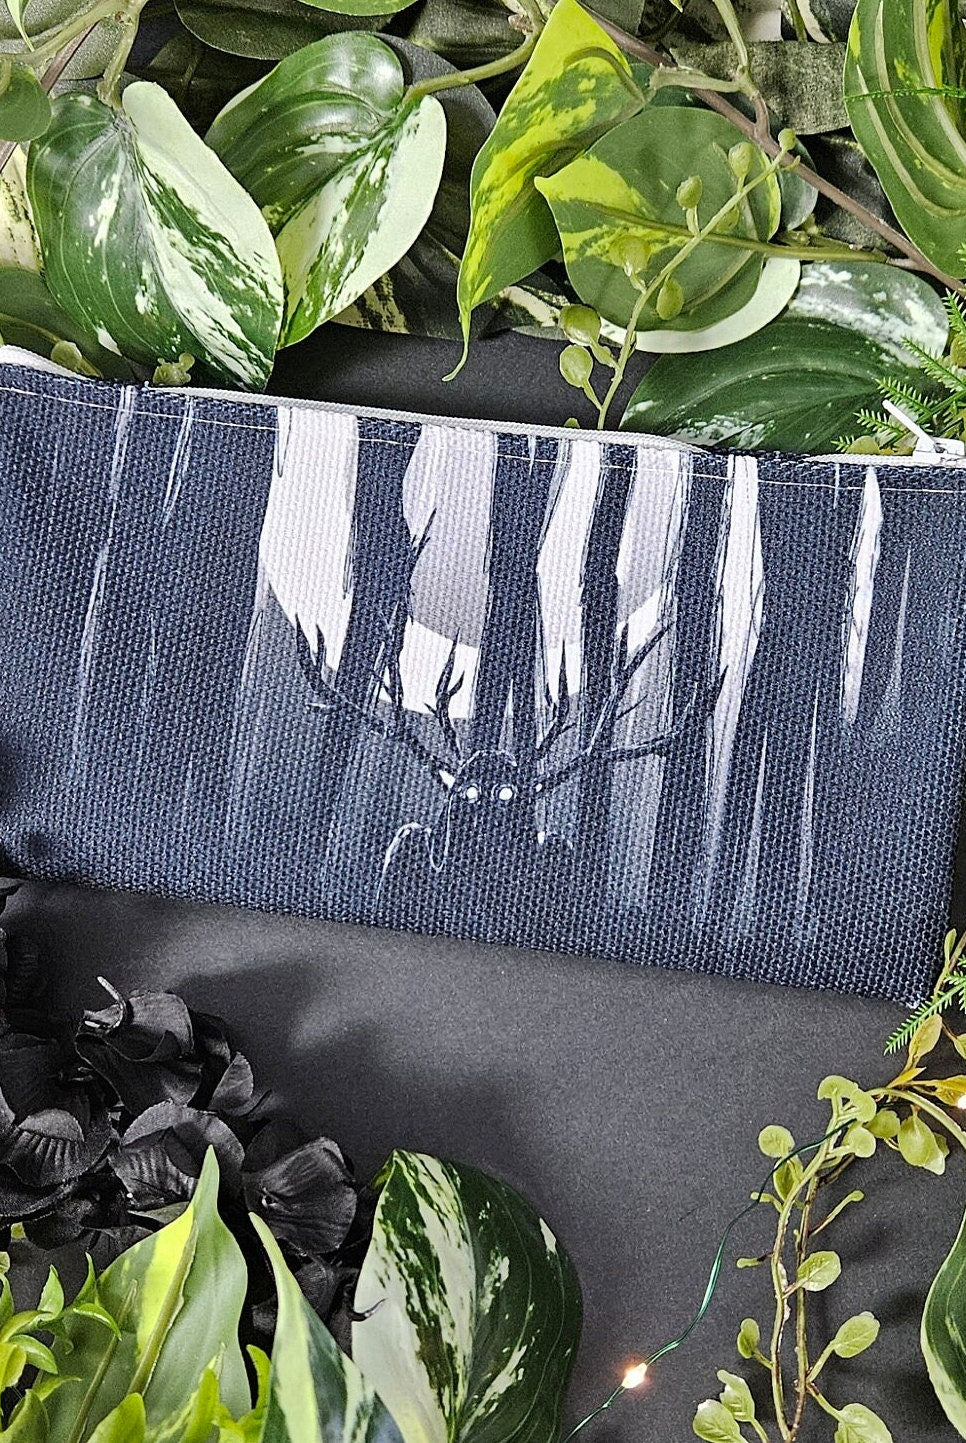 PENCIL POUCH : The Watcher Forest Cryptid Pencil Pouch , The Watcher Cryptid Pencil Pouch , The Watcher Art , Forest Cryptid Dark Art